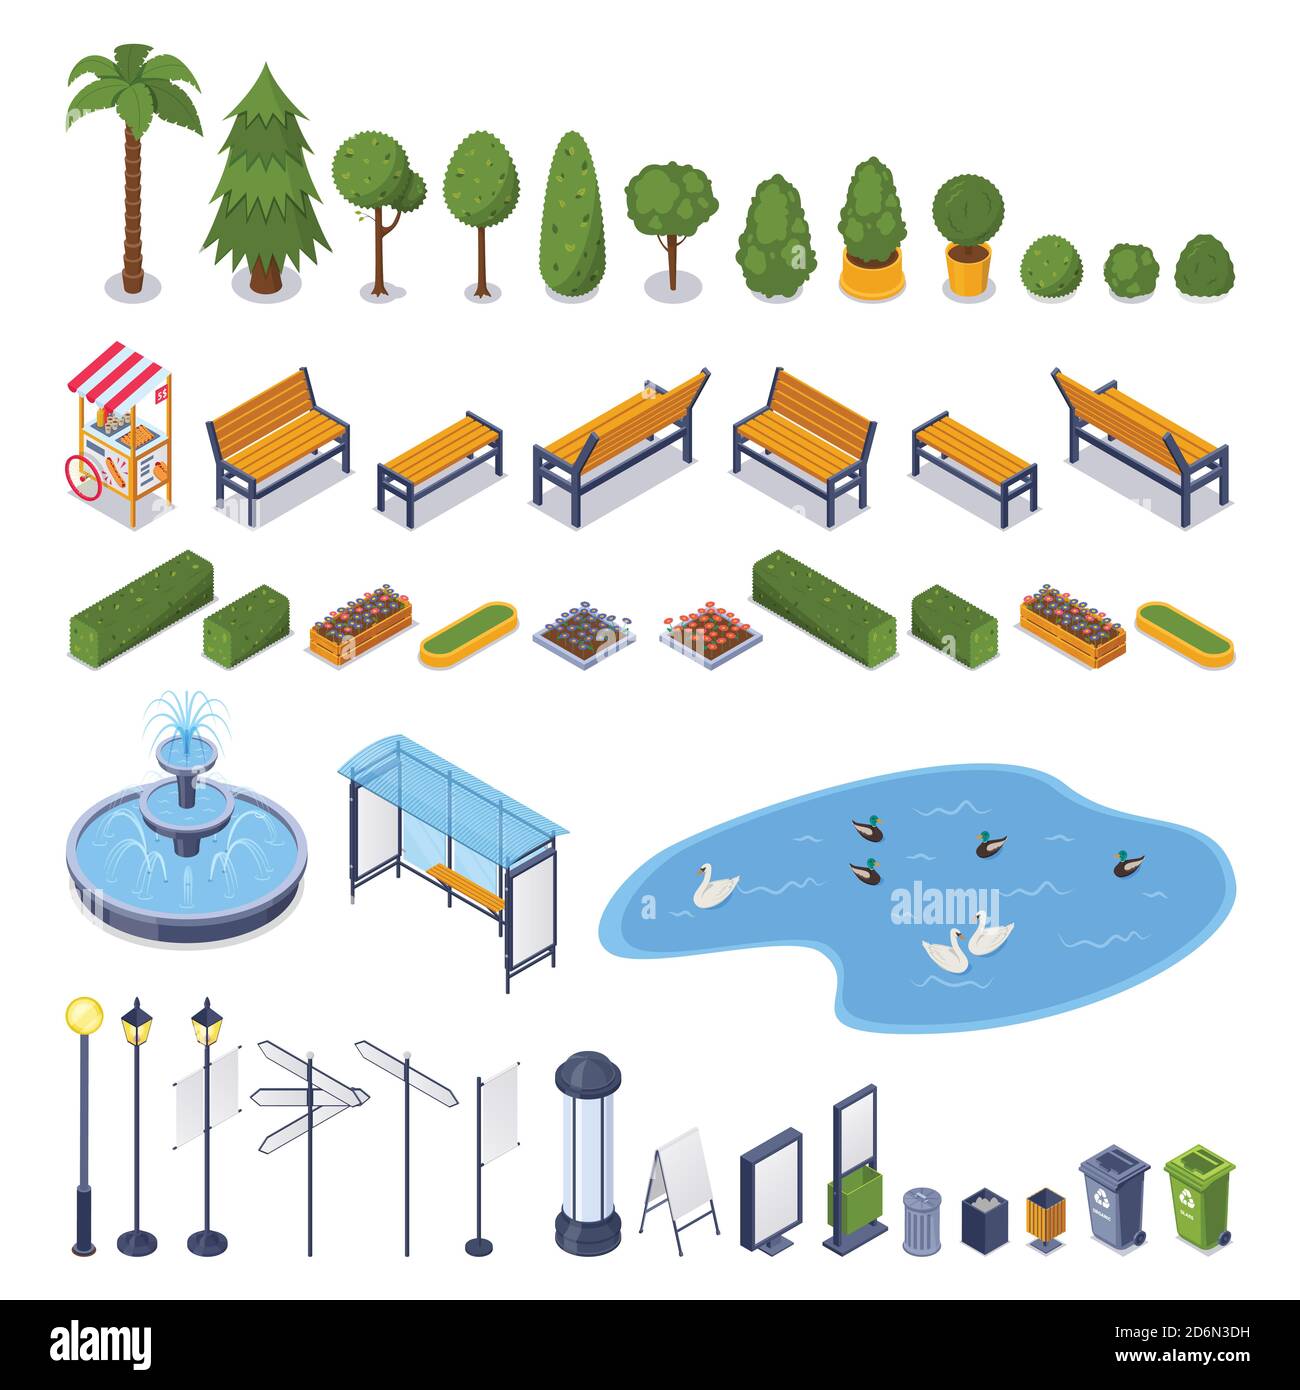 City streets and public park 3d isometric design elements. Vector urban outdoor landscape icons. Green trees, benches, lampposts, garbage containers, Stock Vector